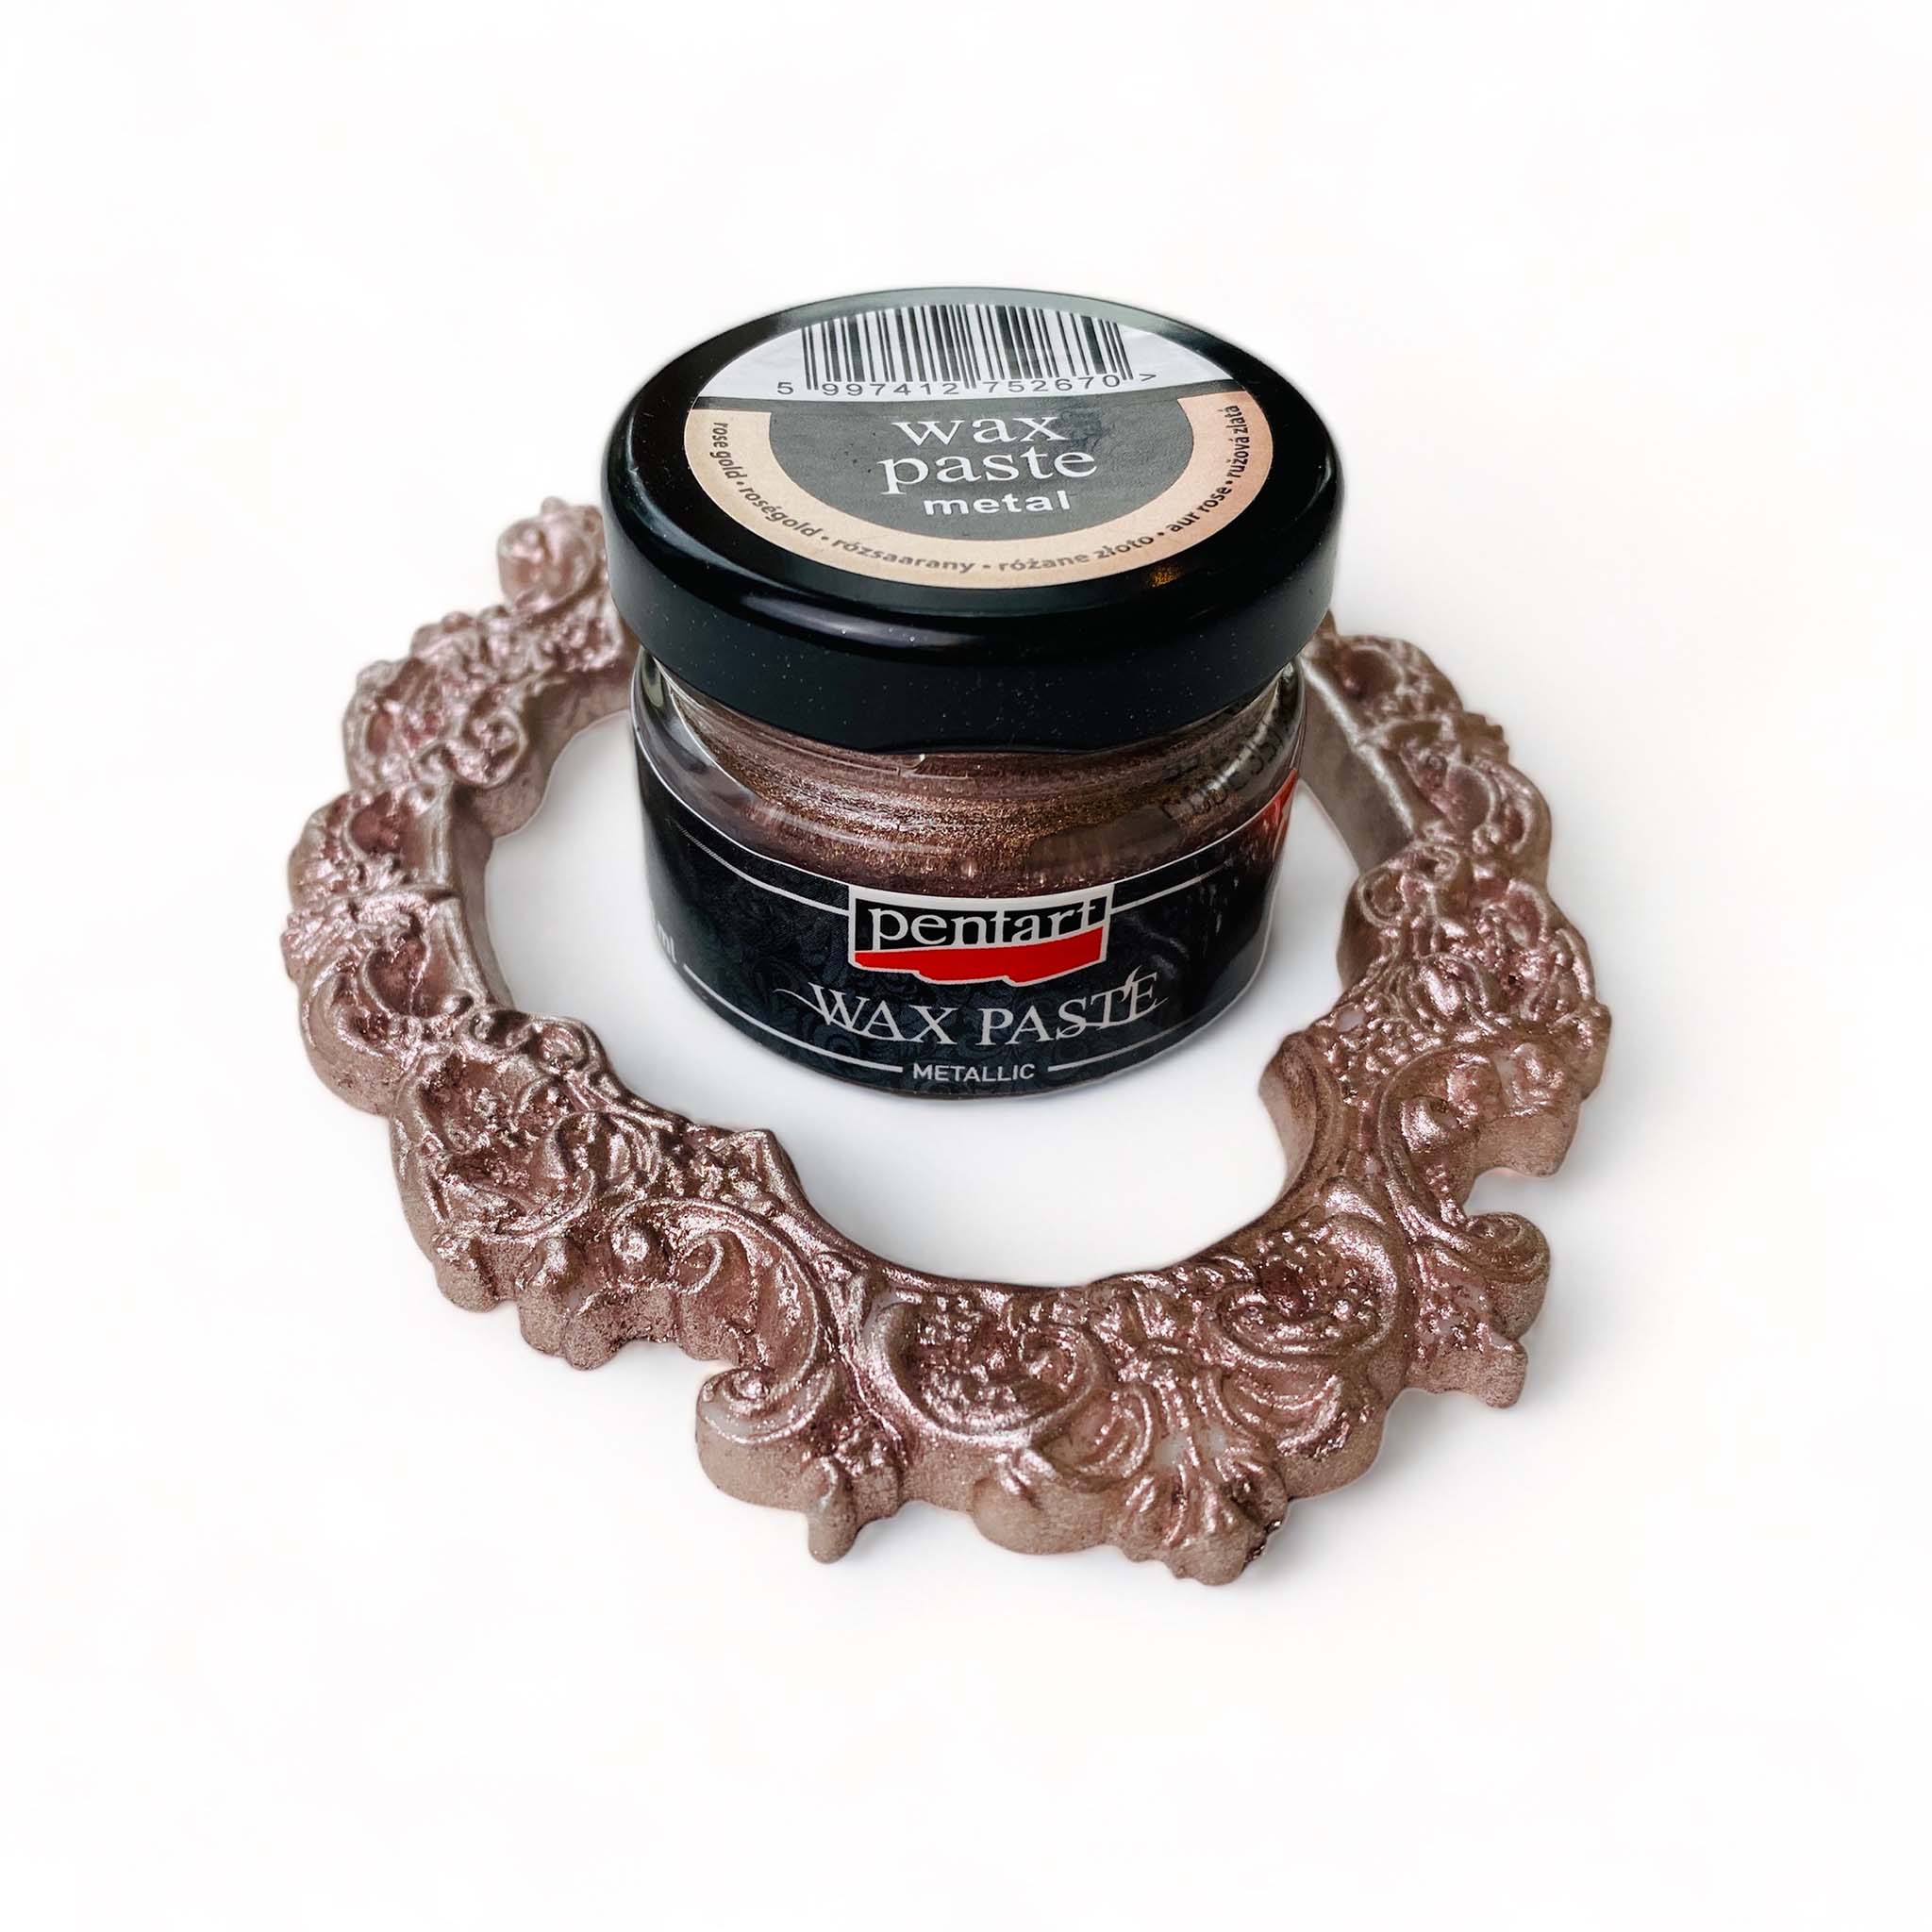 An open jar of a 20ml/0.68 ounce jar of metallic Rose Gold Wax Paste by Pentart is against a white background. An ornate frame covered with Rose Gold Pentart wax paste surrounds the jar.